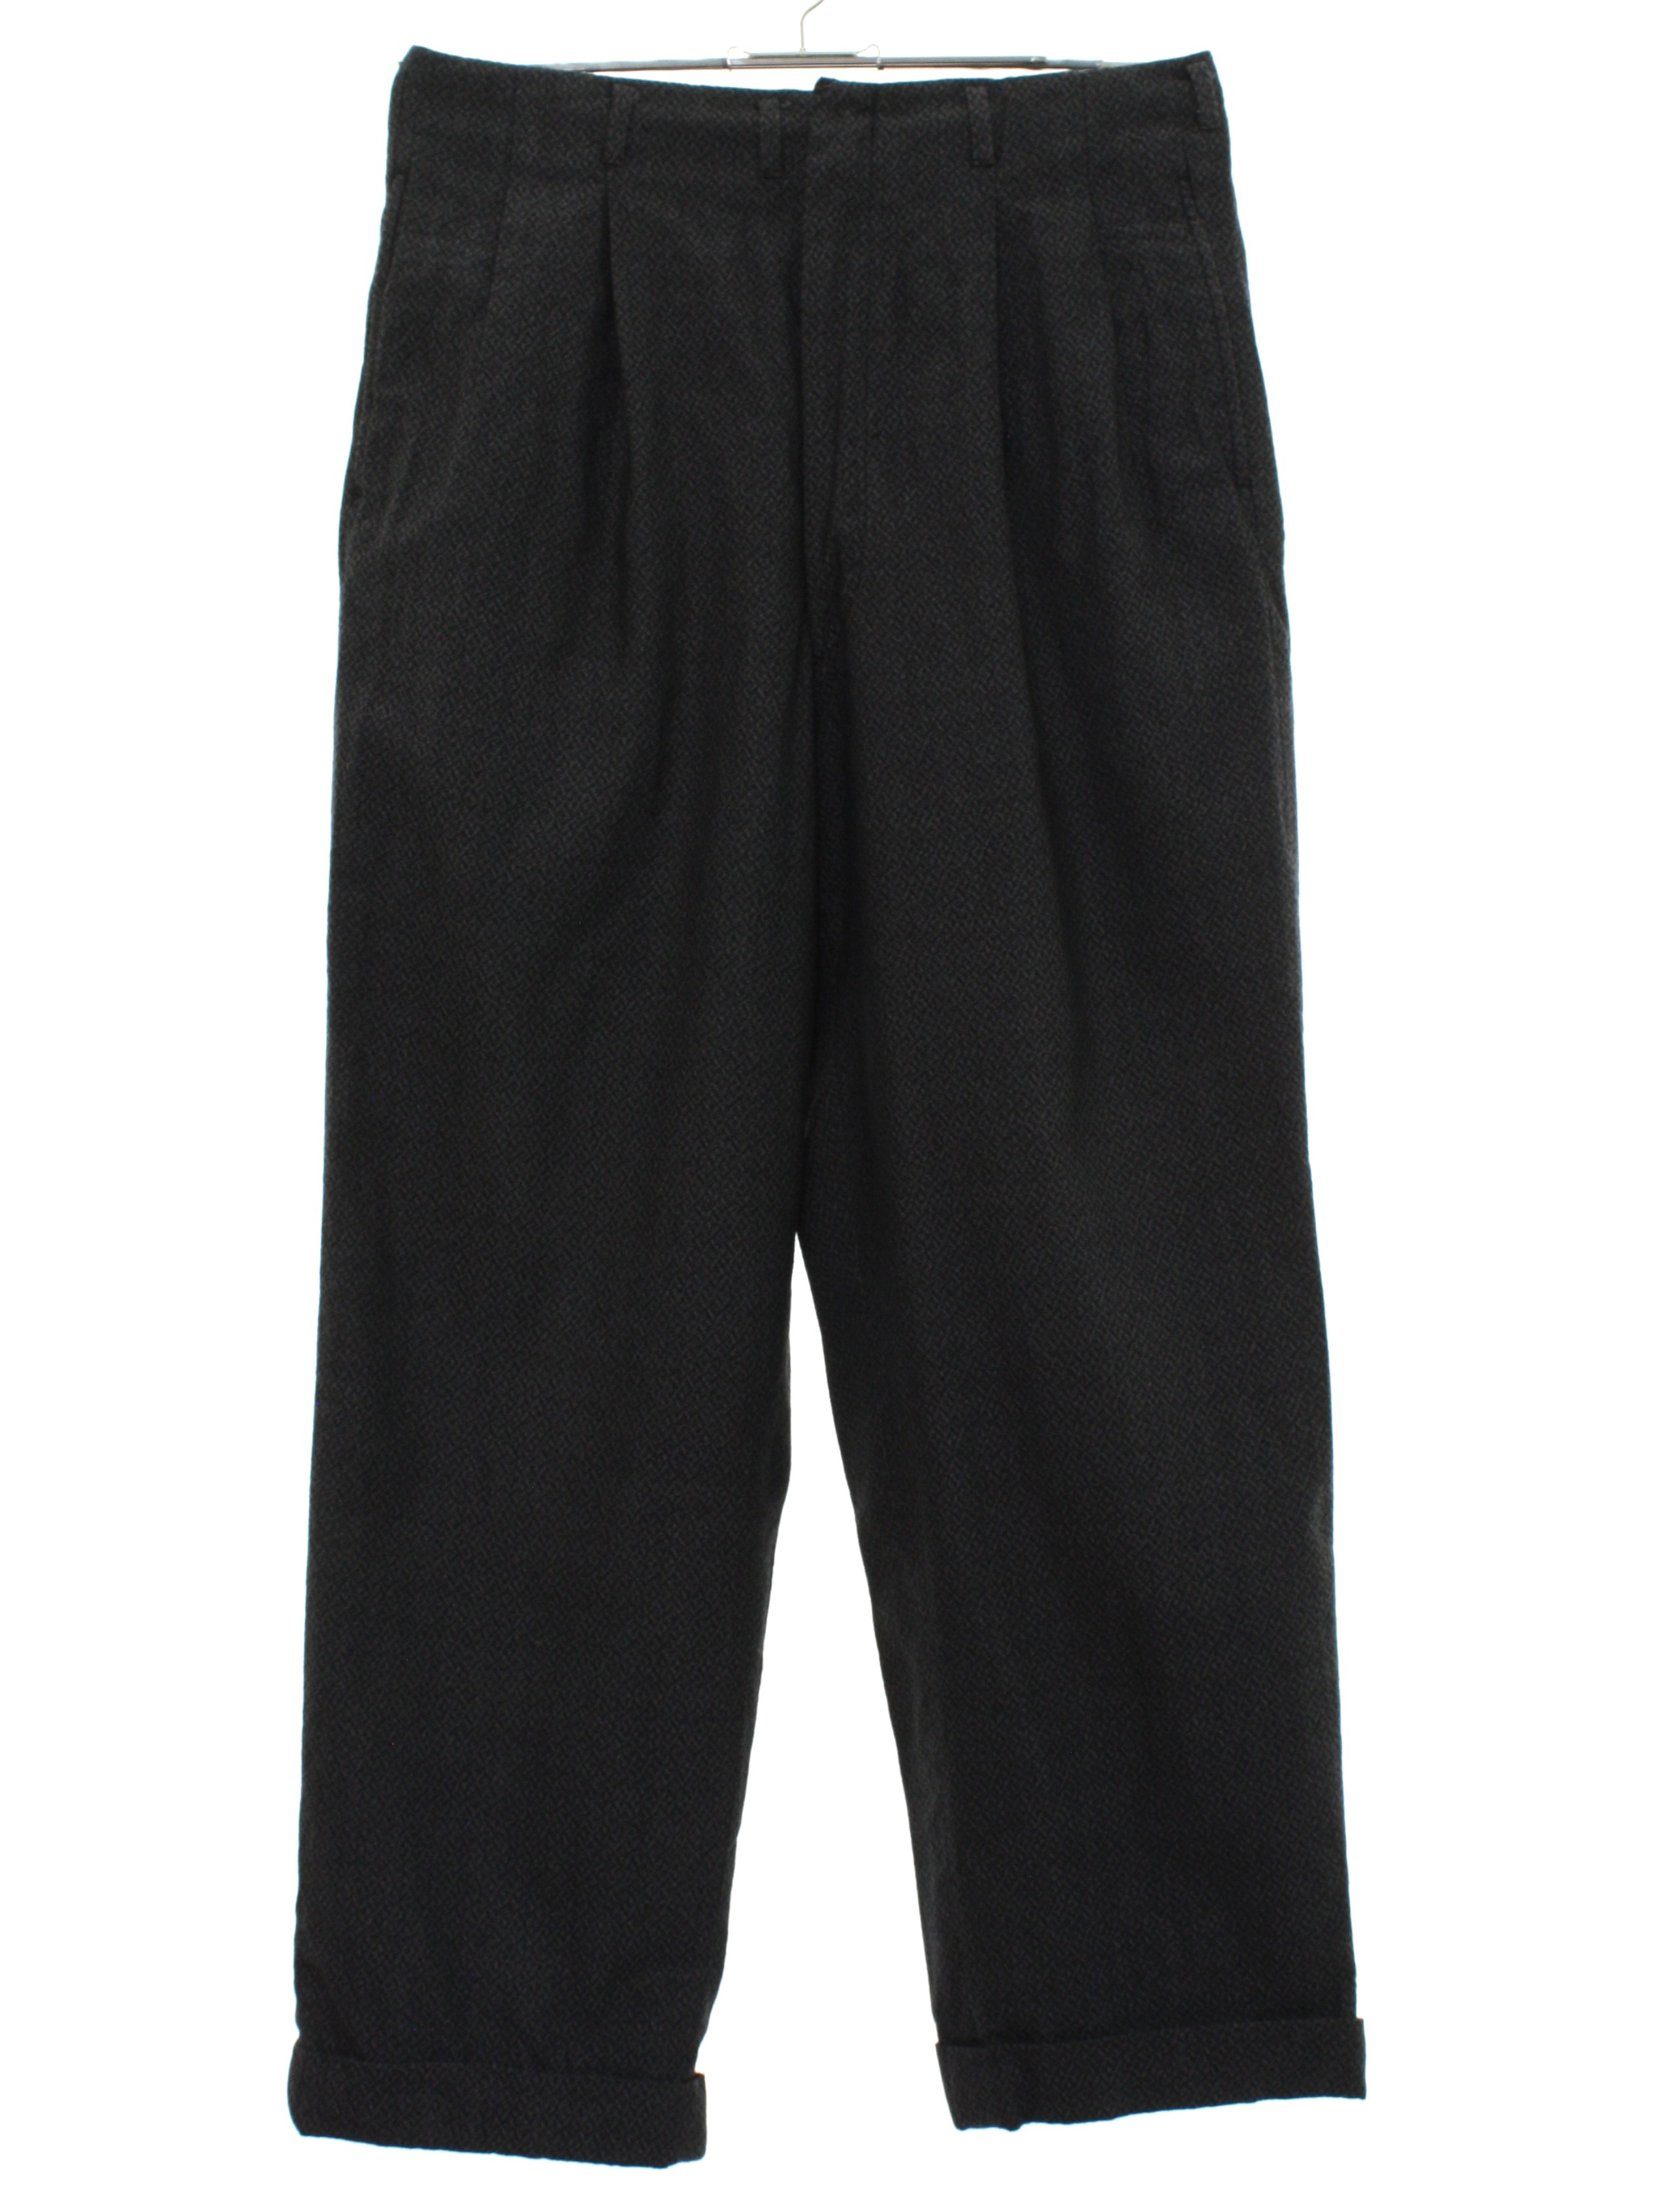 1950's Retro Pants: 50s -Missing Label- Mens black and charcoal grey ...